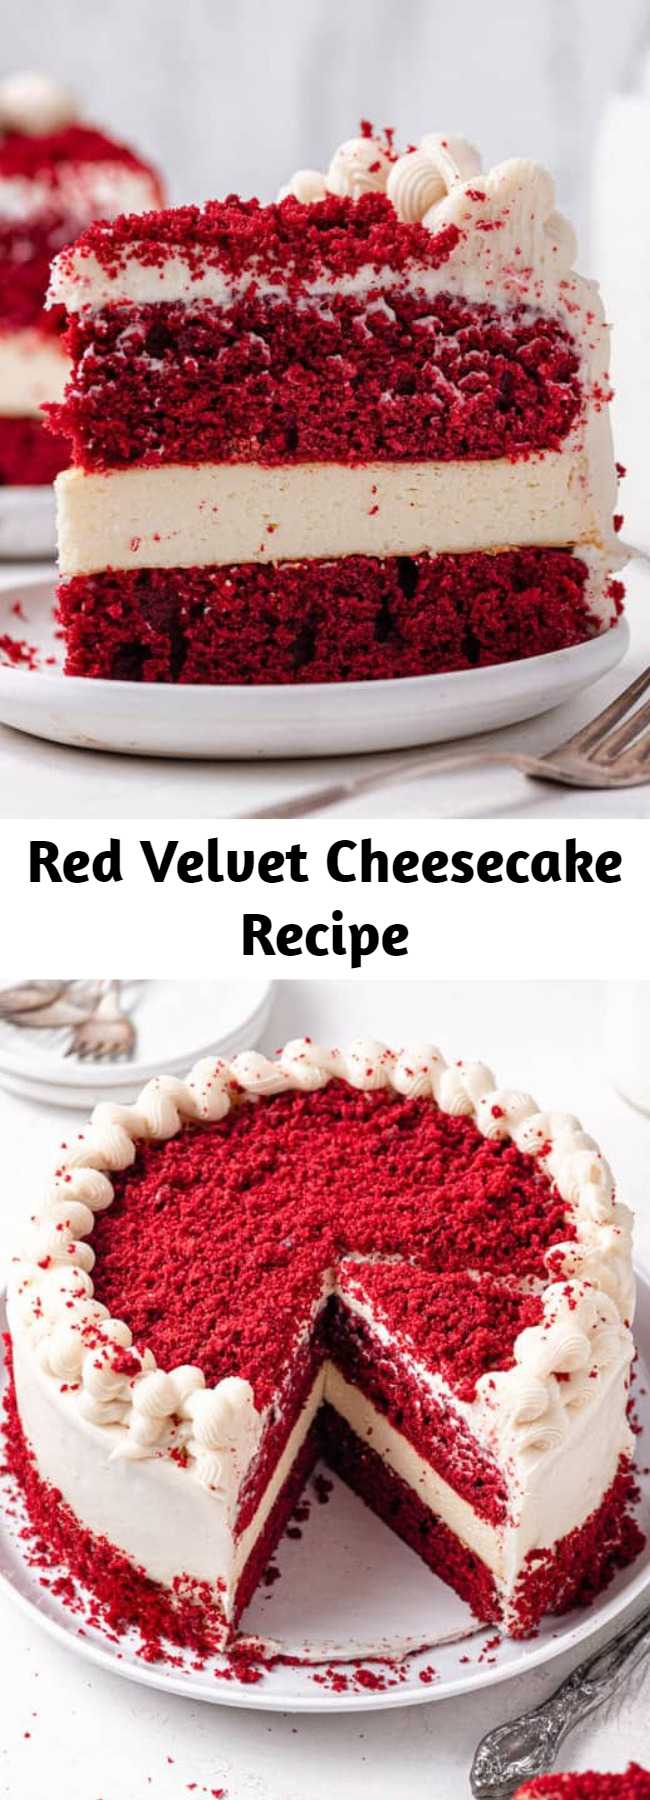 Red Velvet Cheesecake Recipe - Layers of tender red velvet cake sandwich velvety cheesecake in this absolutely decadent Red Velvet Cheesecake. A must for Valentine's Day!